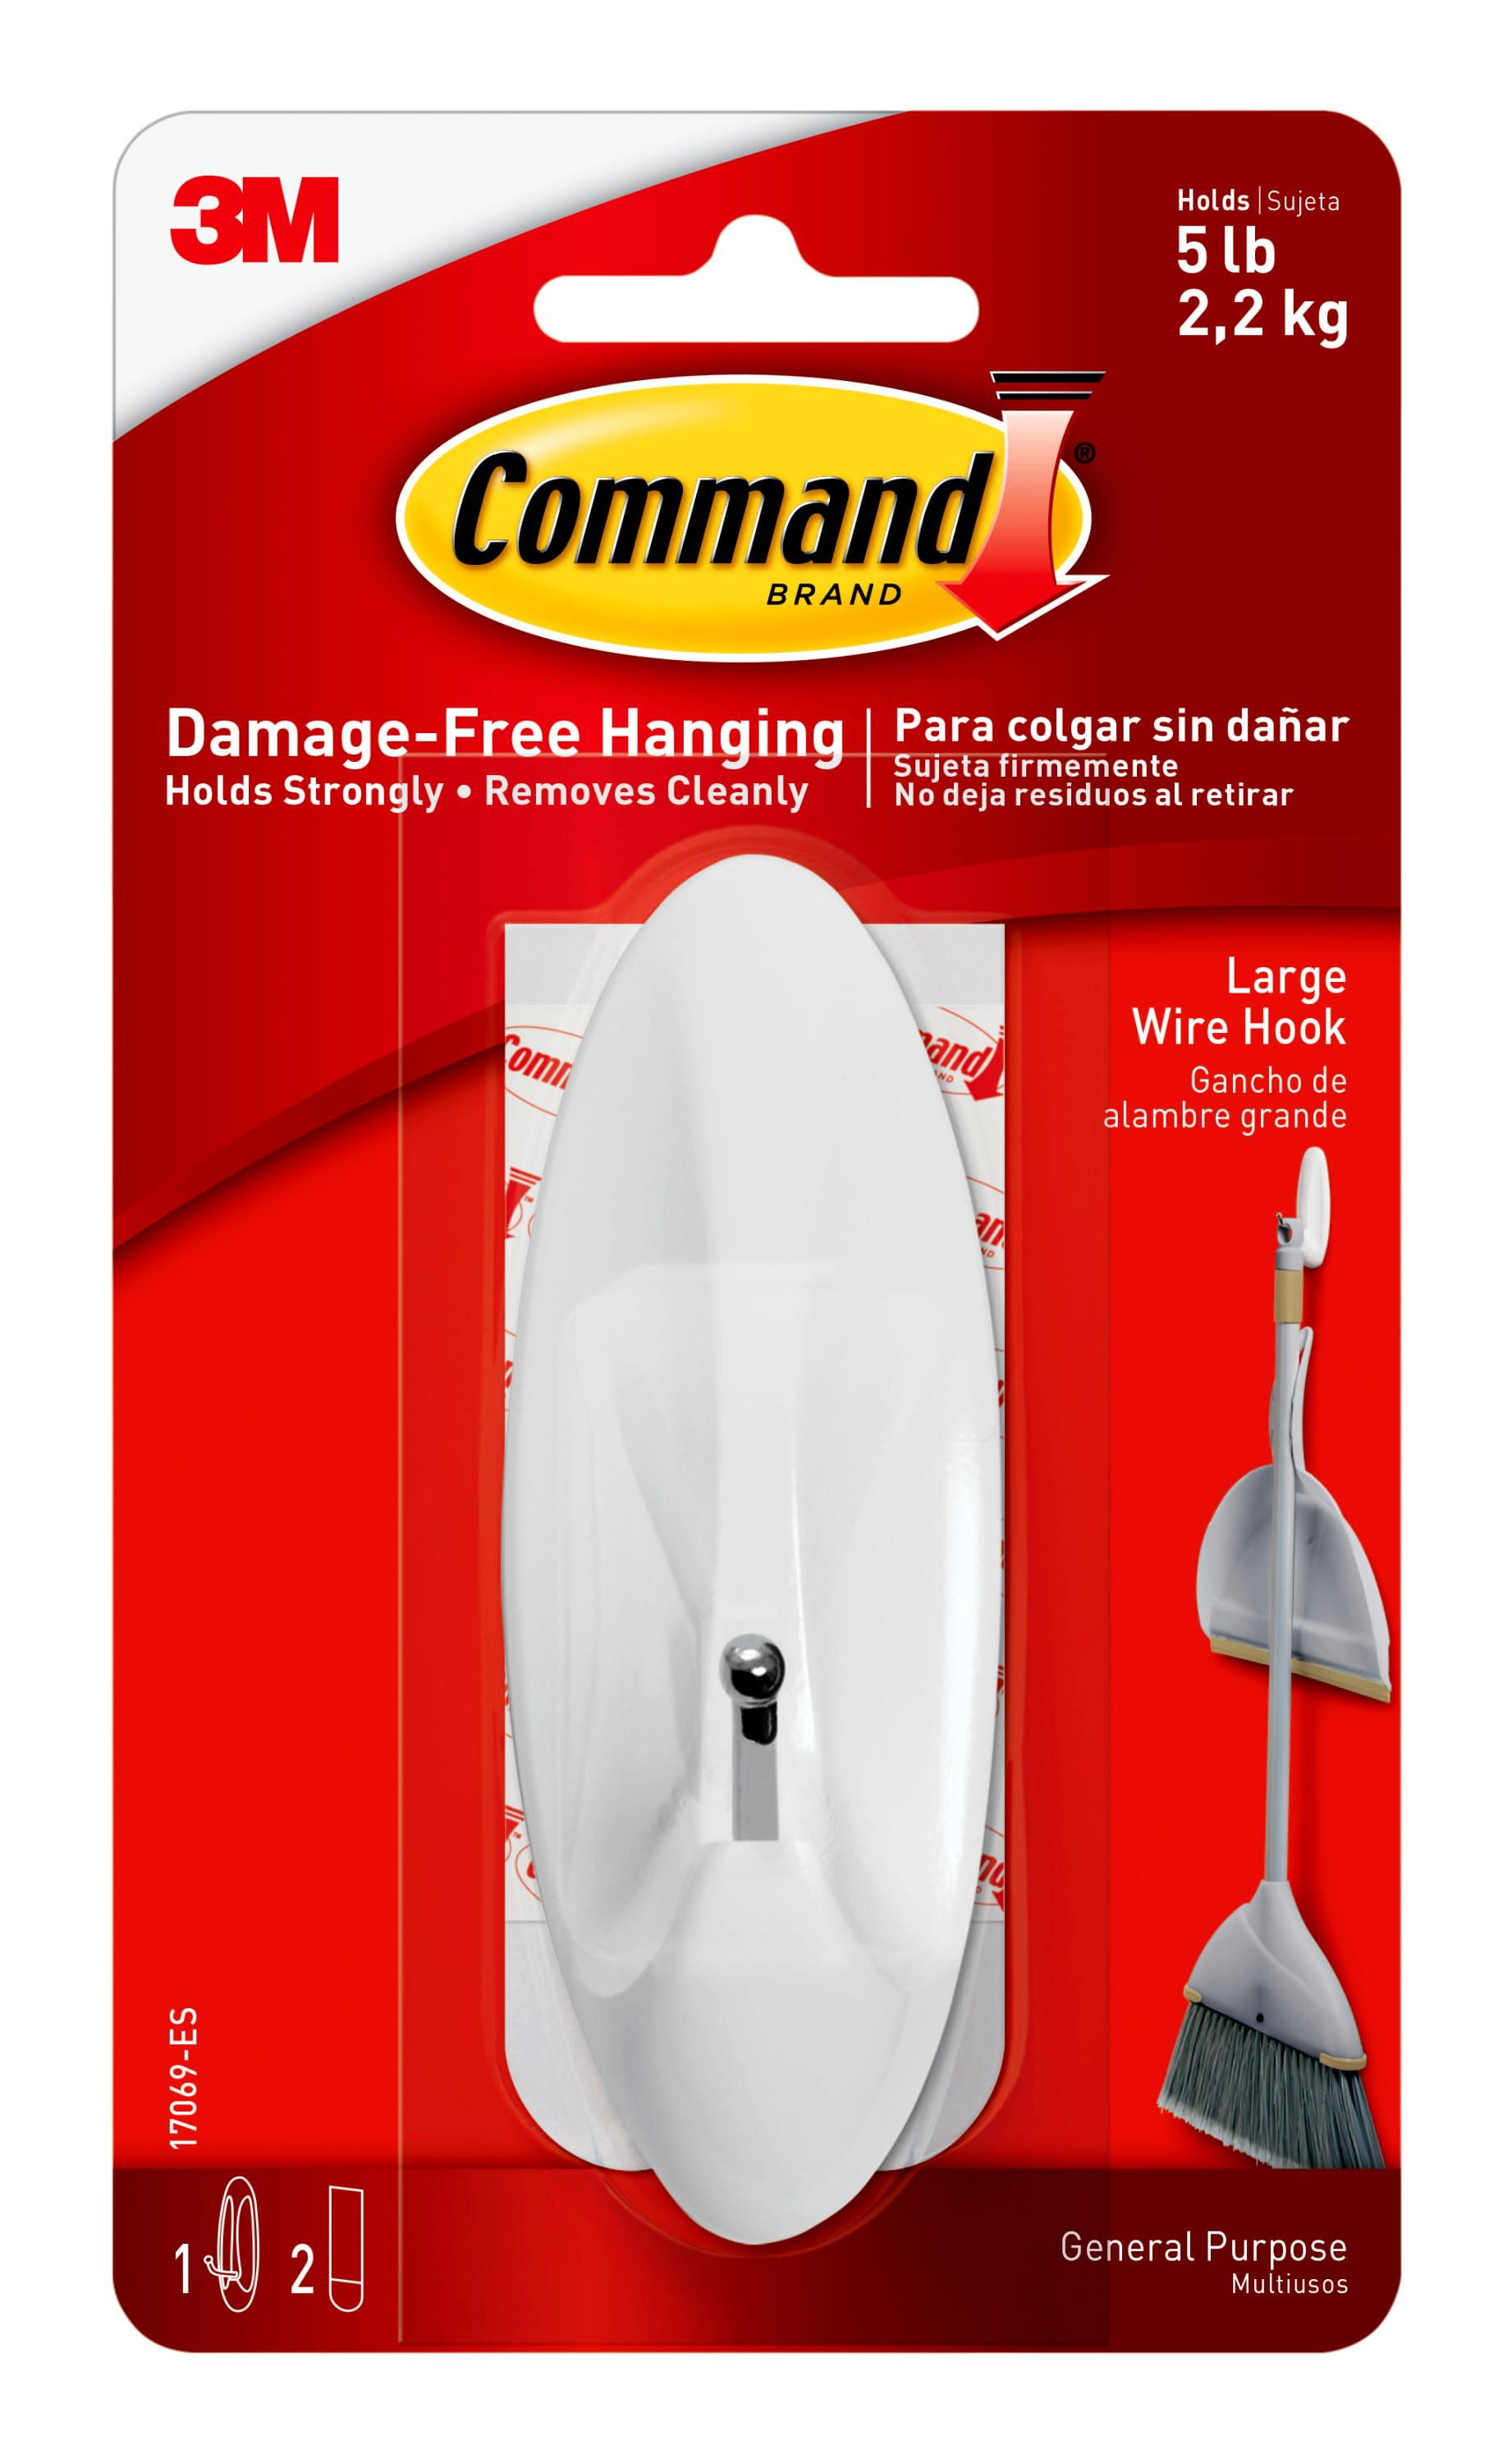 Command Outdoor Clear Window Hook, Large, 1 Hook, 2 Strips/Pack